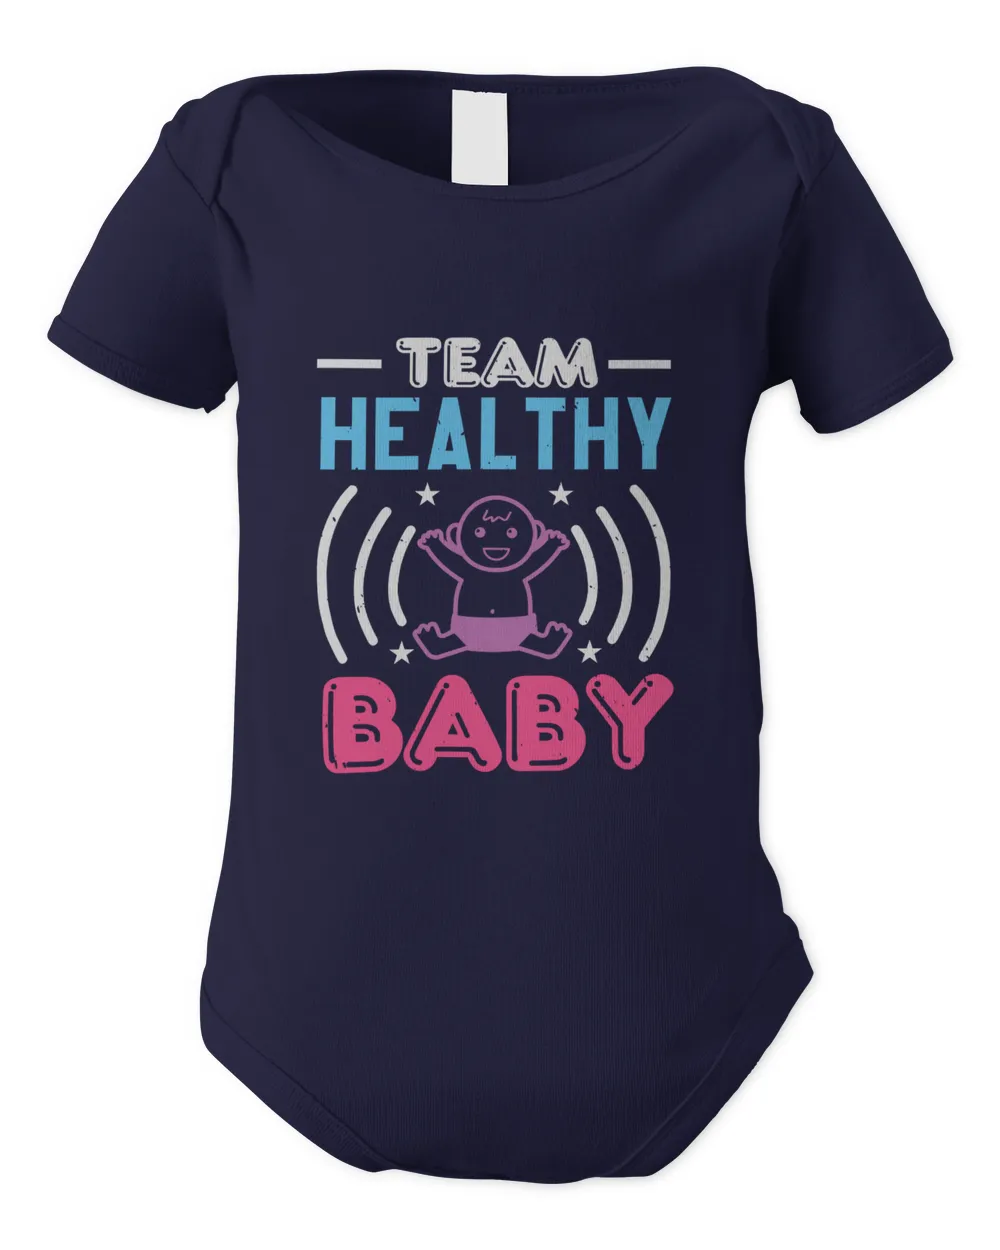 Team Healthey Baby Shirt, Gift For Family, Toddler T Shirt, Baby Bodysuit